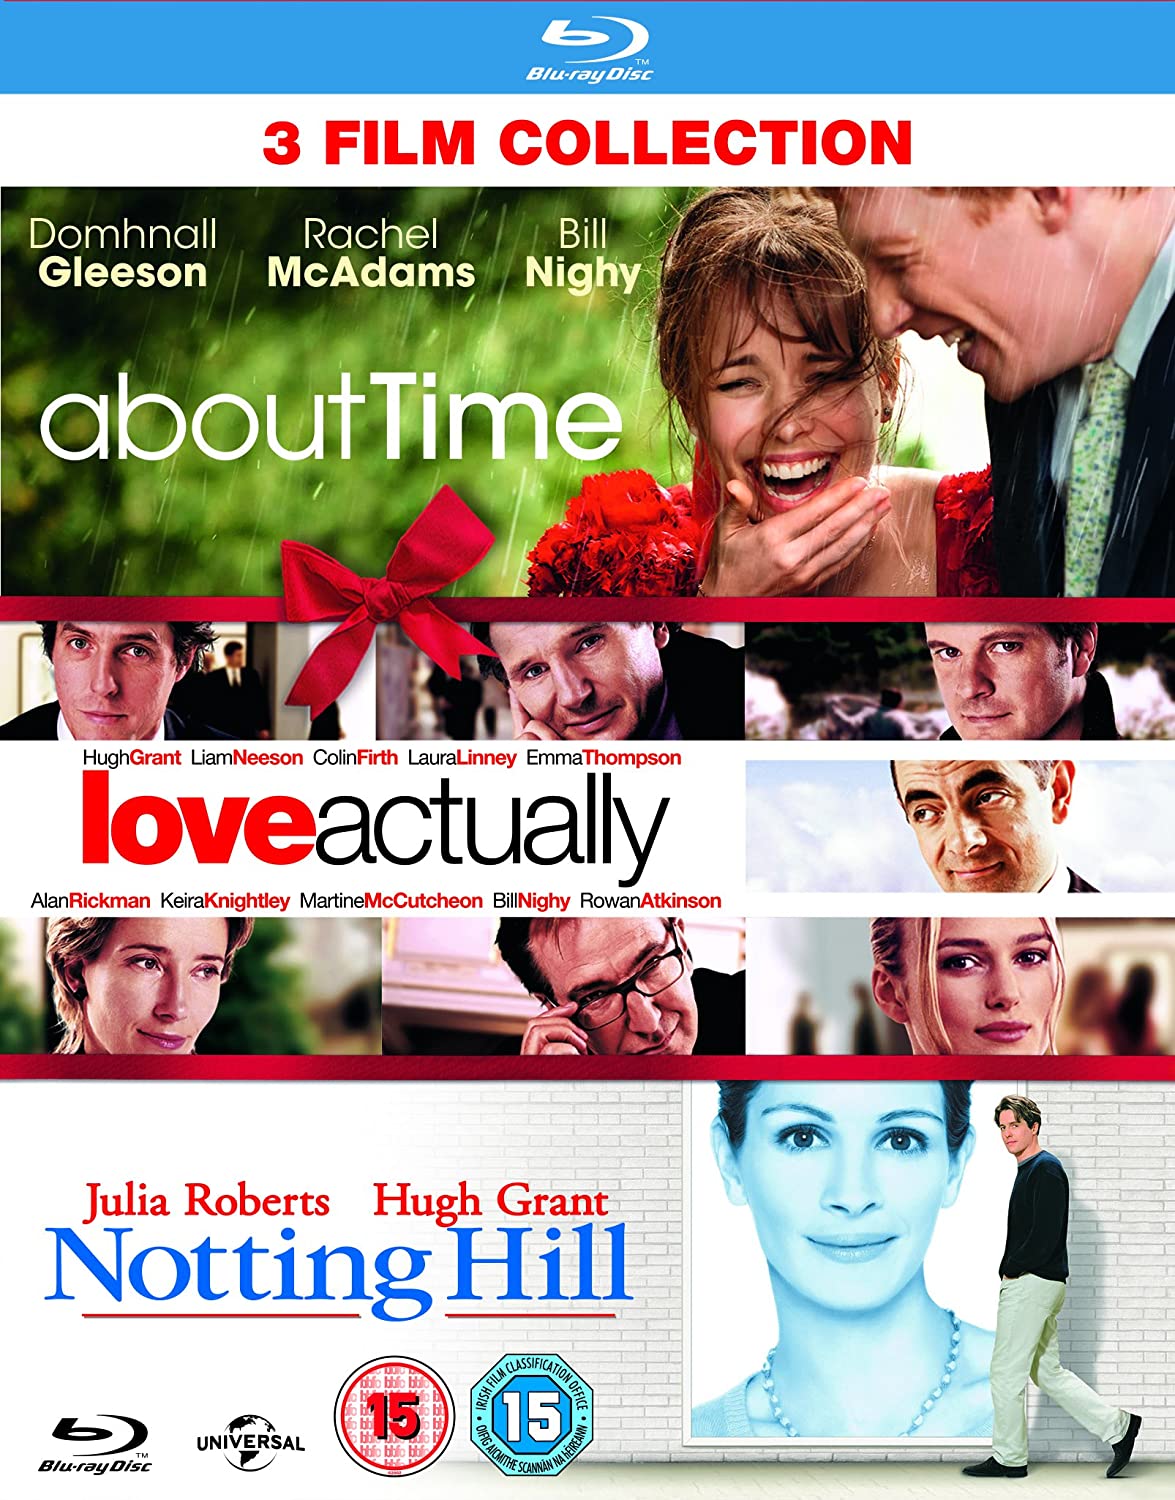 ABOUTTIME/LOVEACTUALLY/NOTTINGHILLBD